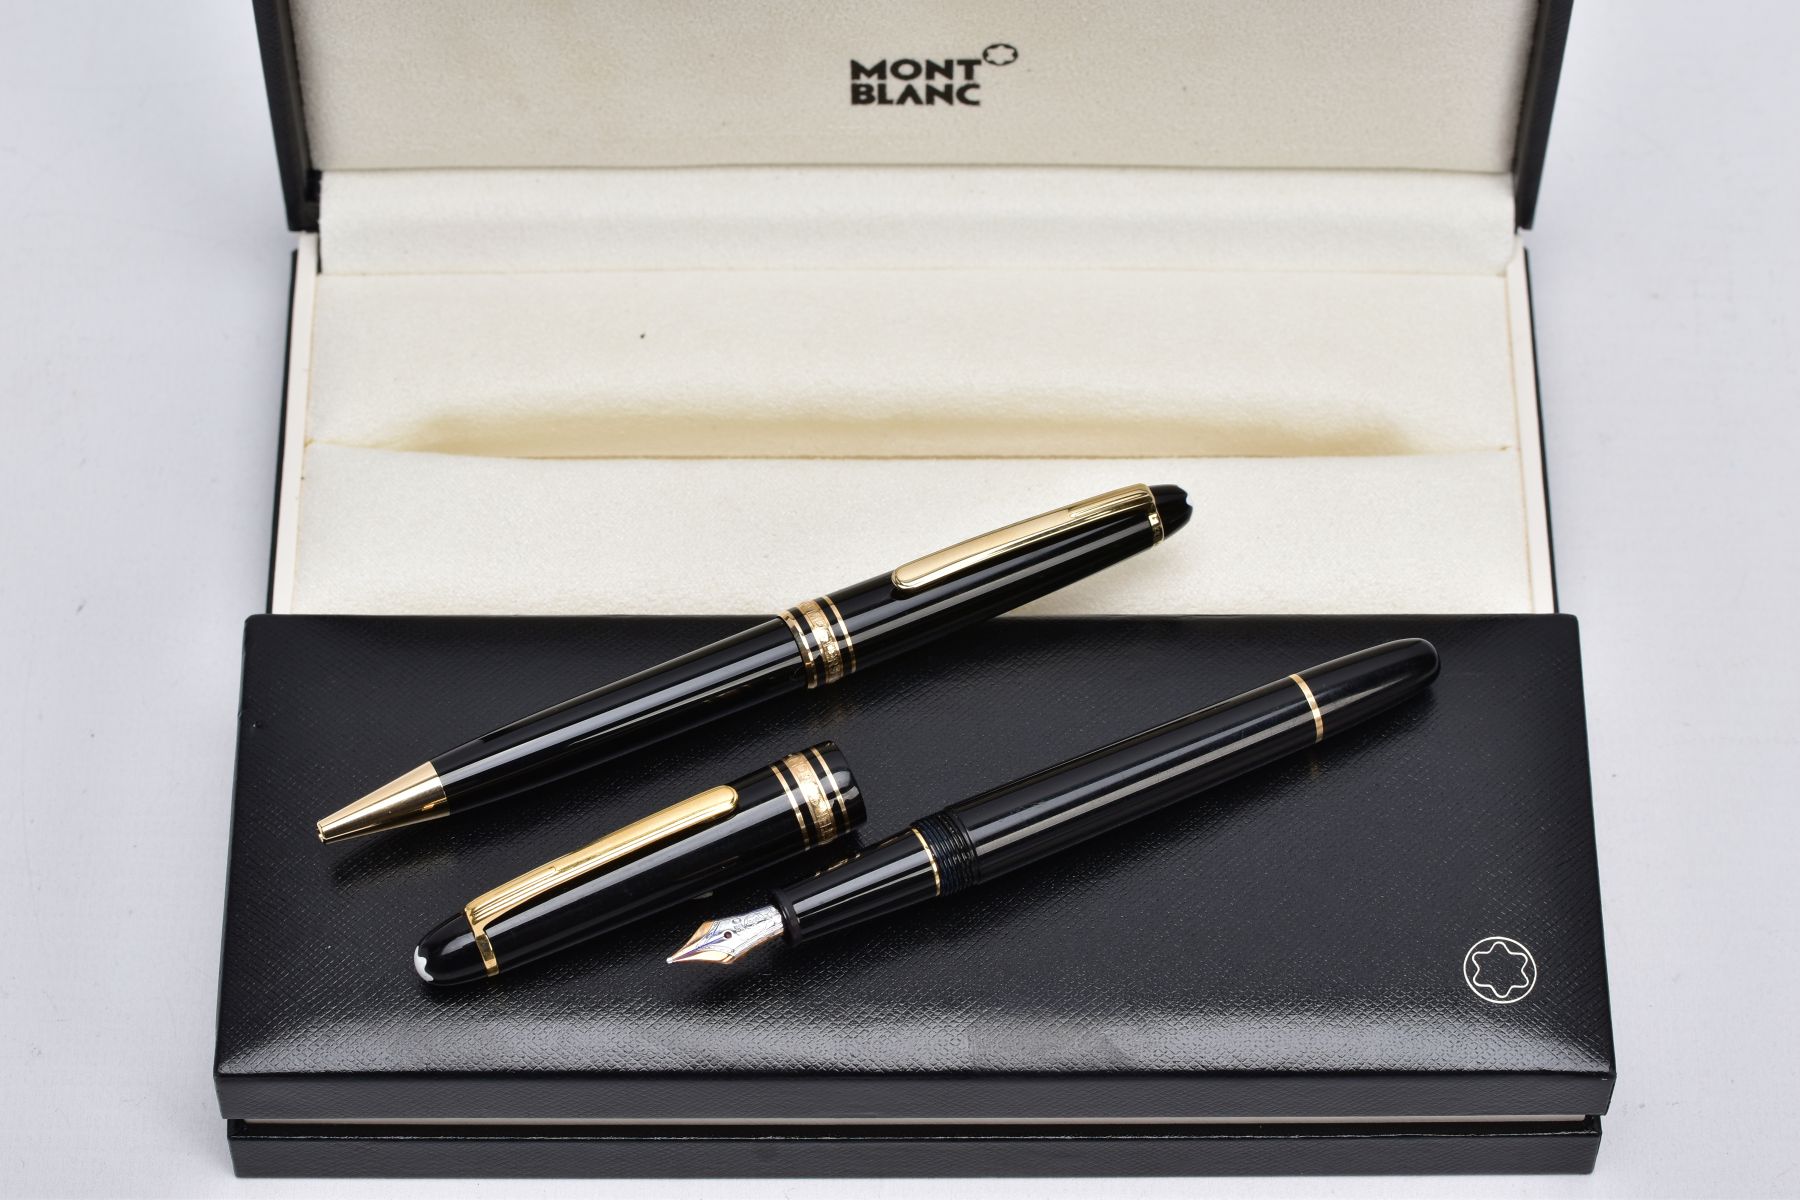 A CASED 'MONT BLANC-MEISTERSTUCK' FOUNTAIN PEN AND BALL POINT PEN, black lacquer with gold